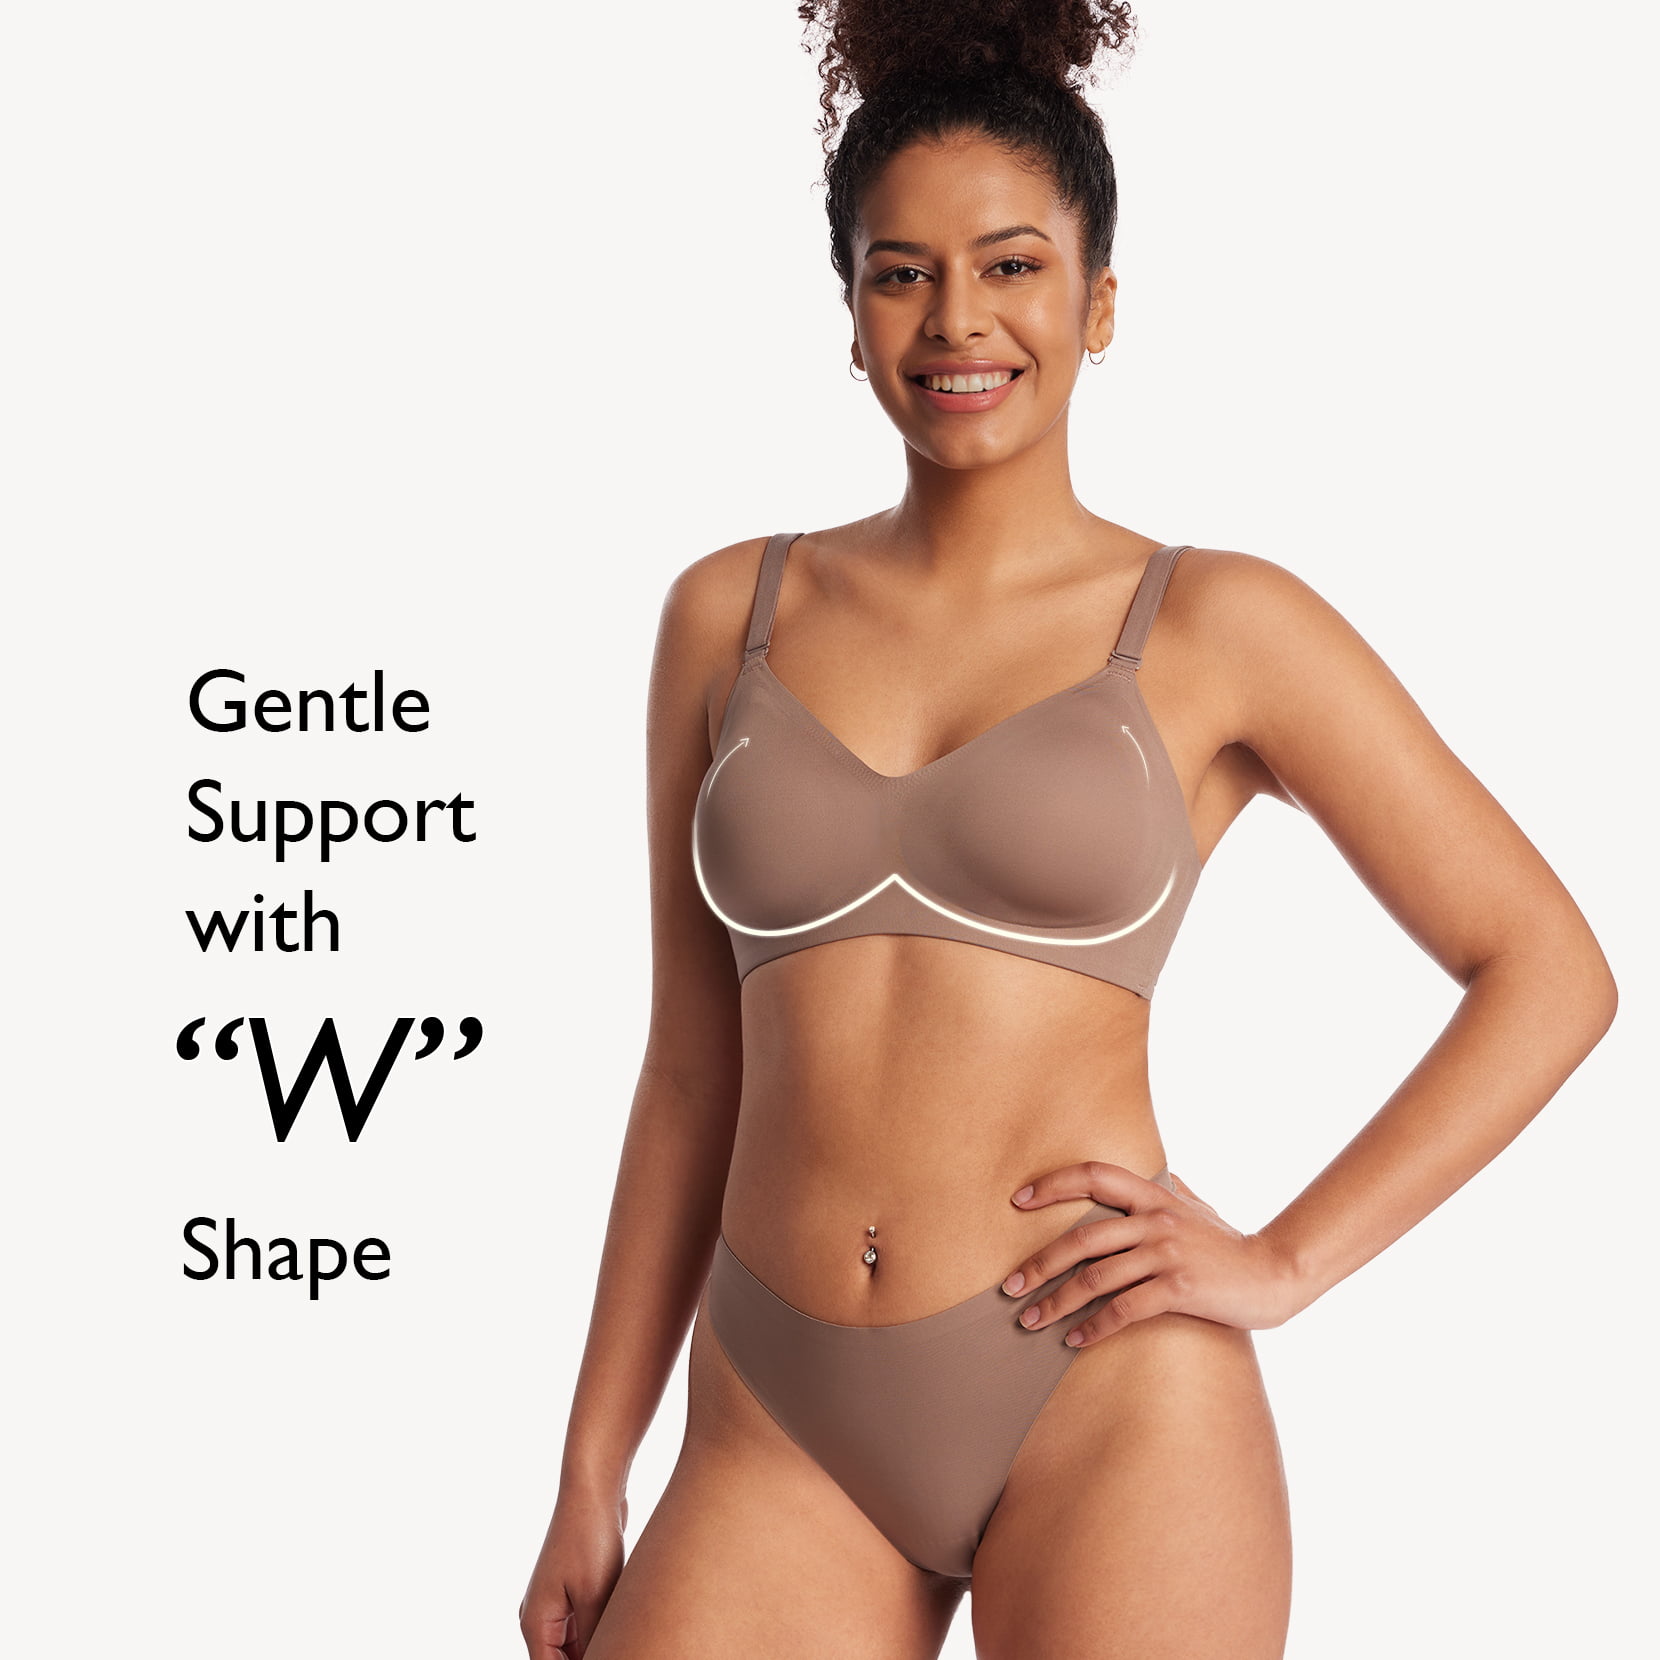 comfelie bras perfect for everyday use! I have these bras for you in my   Storefeont under bras and Promo codes for a 30% discount…